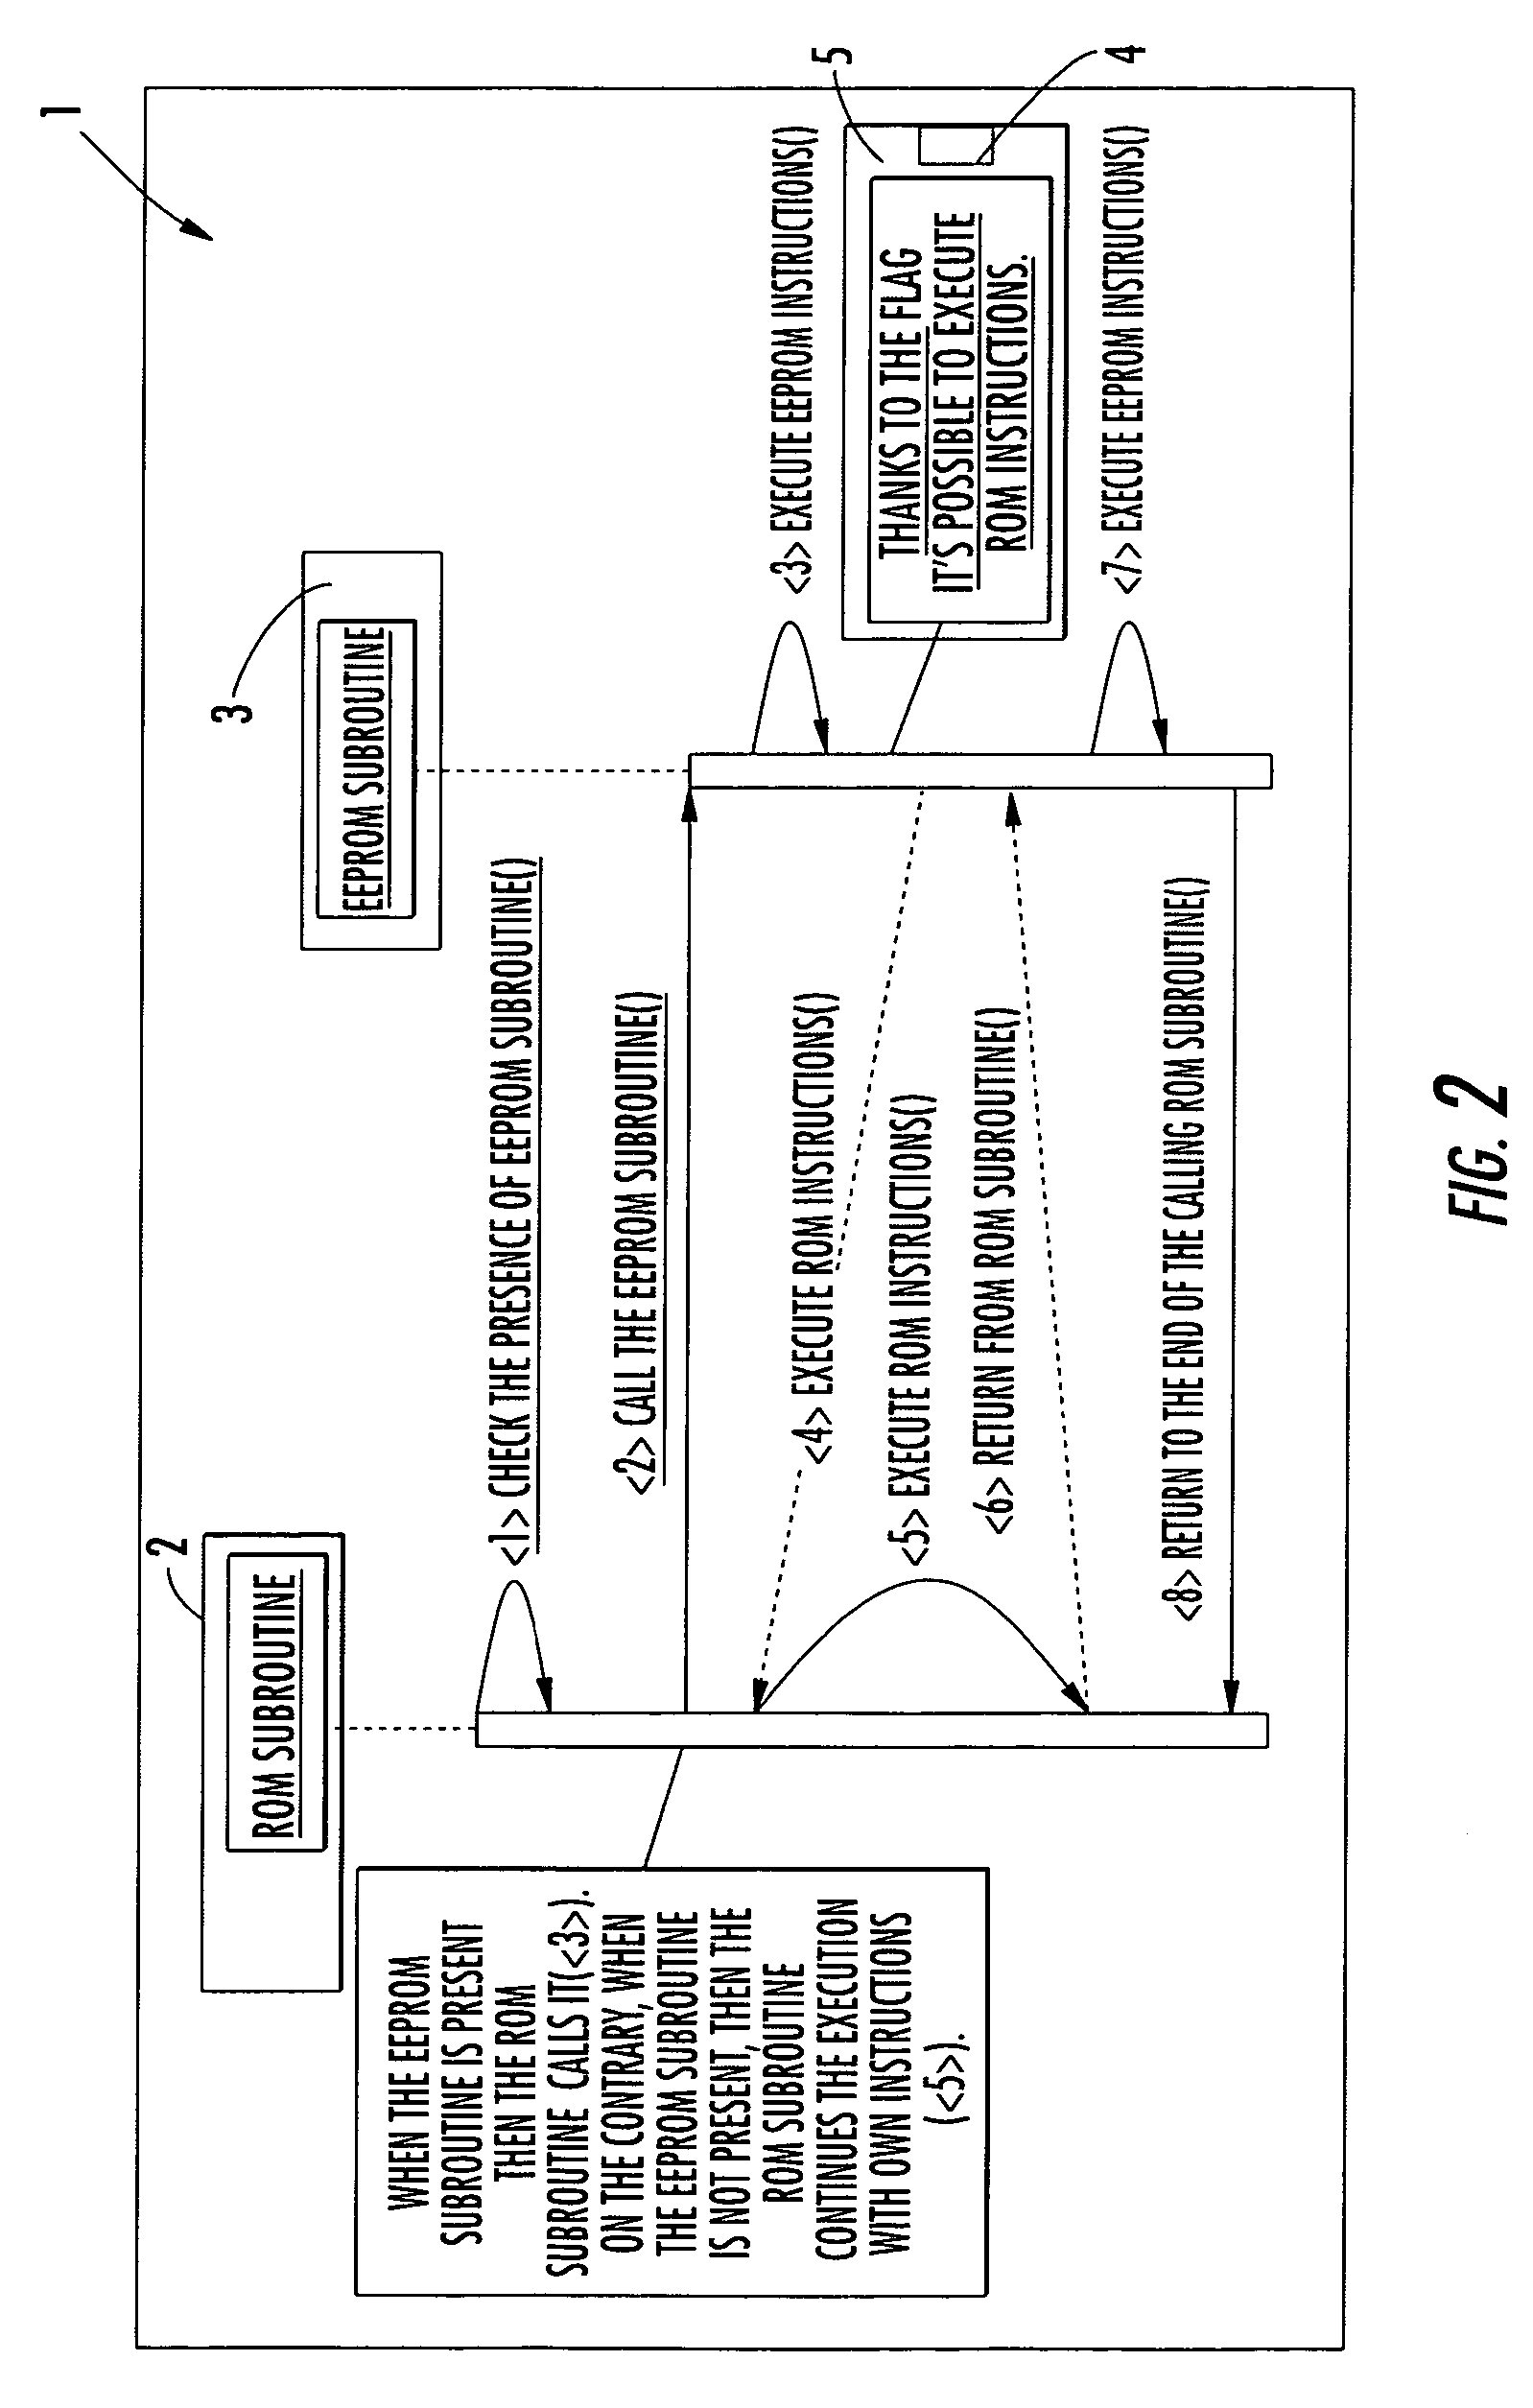 Method for patching ROM instructions in an electronic embedded system including at least a further memory portion